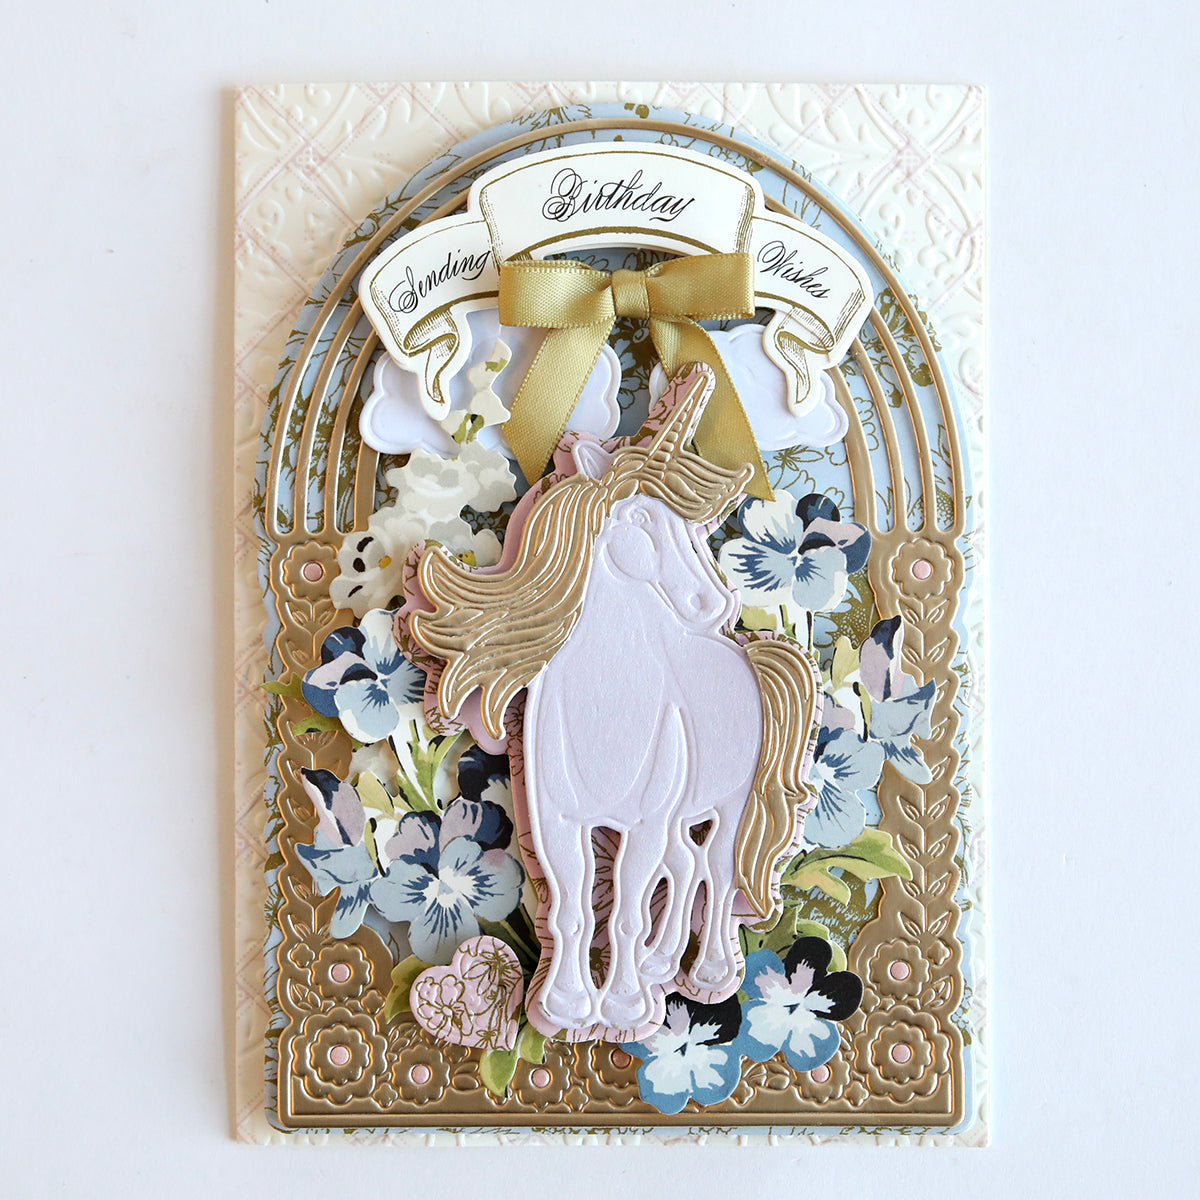 A handcrafted birthday greeting card with a gold and floral design, featuring a central white unicorn motif made using the 3D Unicorn Scene Dies set and a golden "birthday wish" banner, accented by a satin ribbon bow.